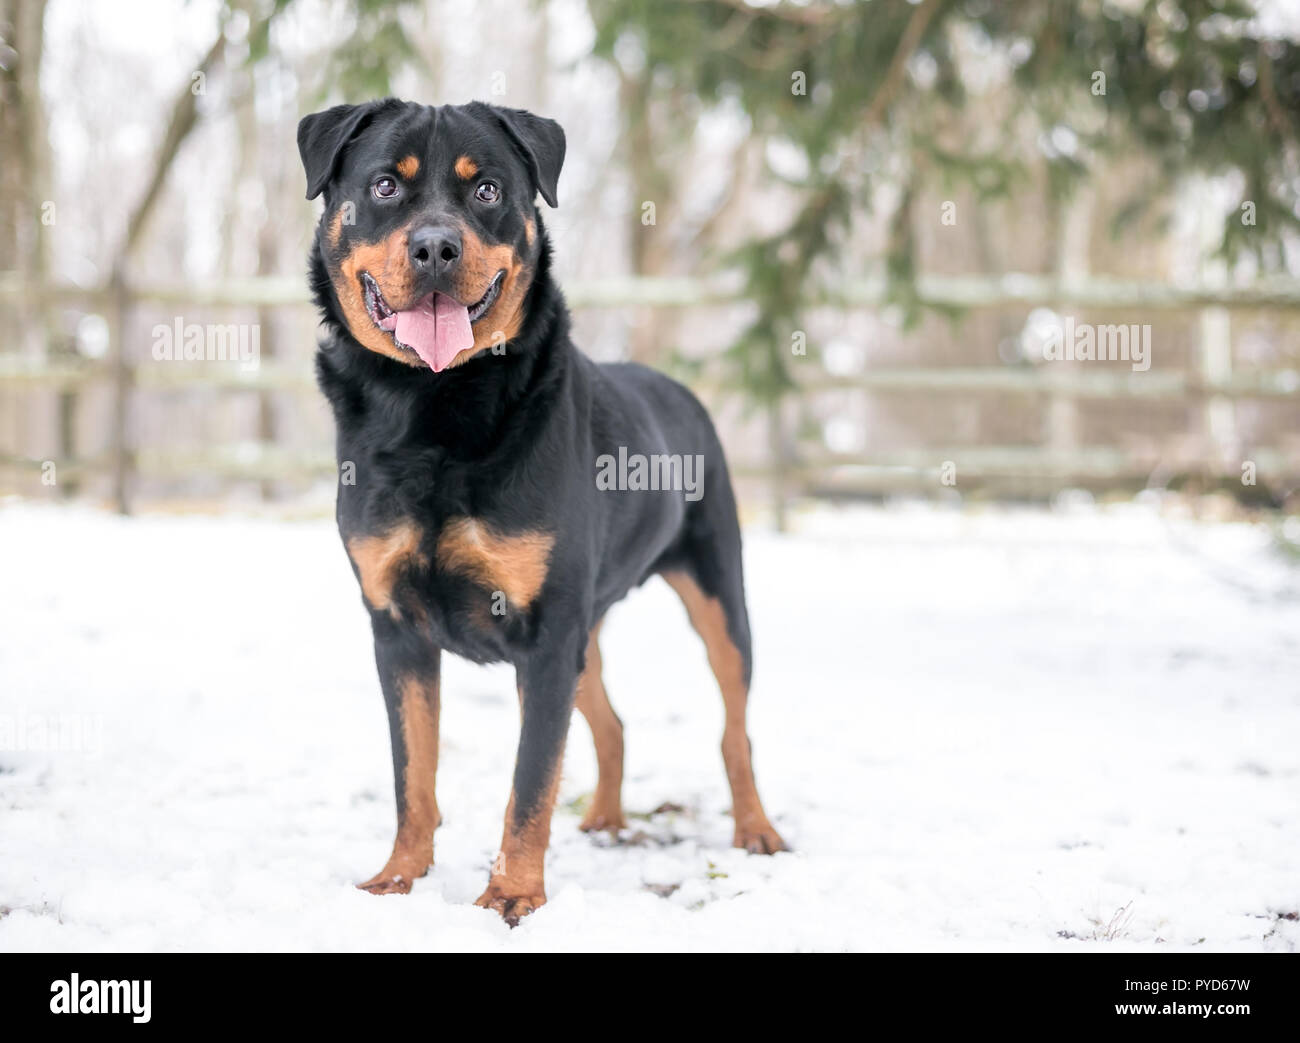 A happy Rottweiler dog standing outdoors in the snow Stock Photo